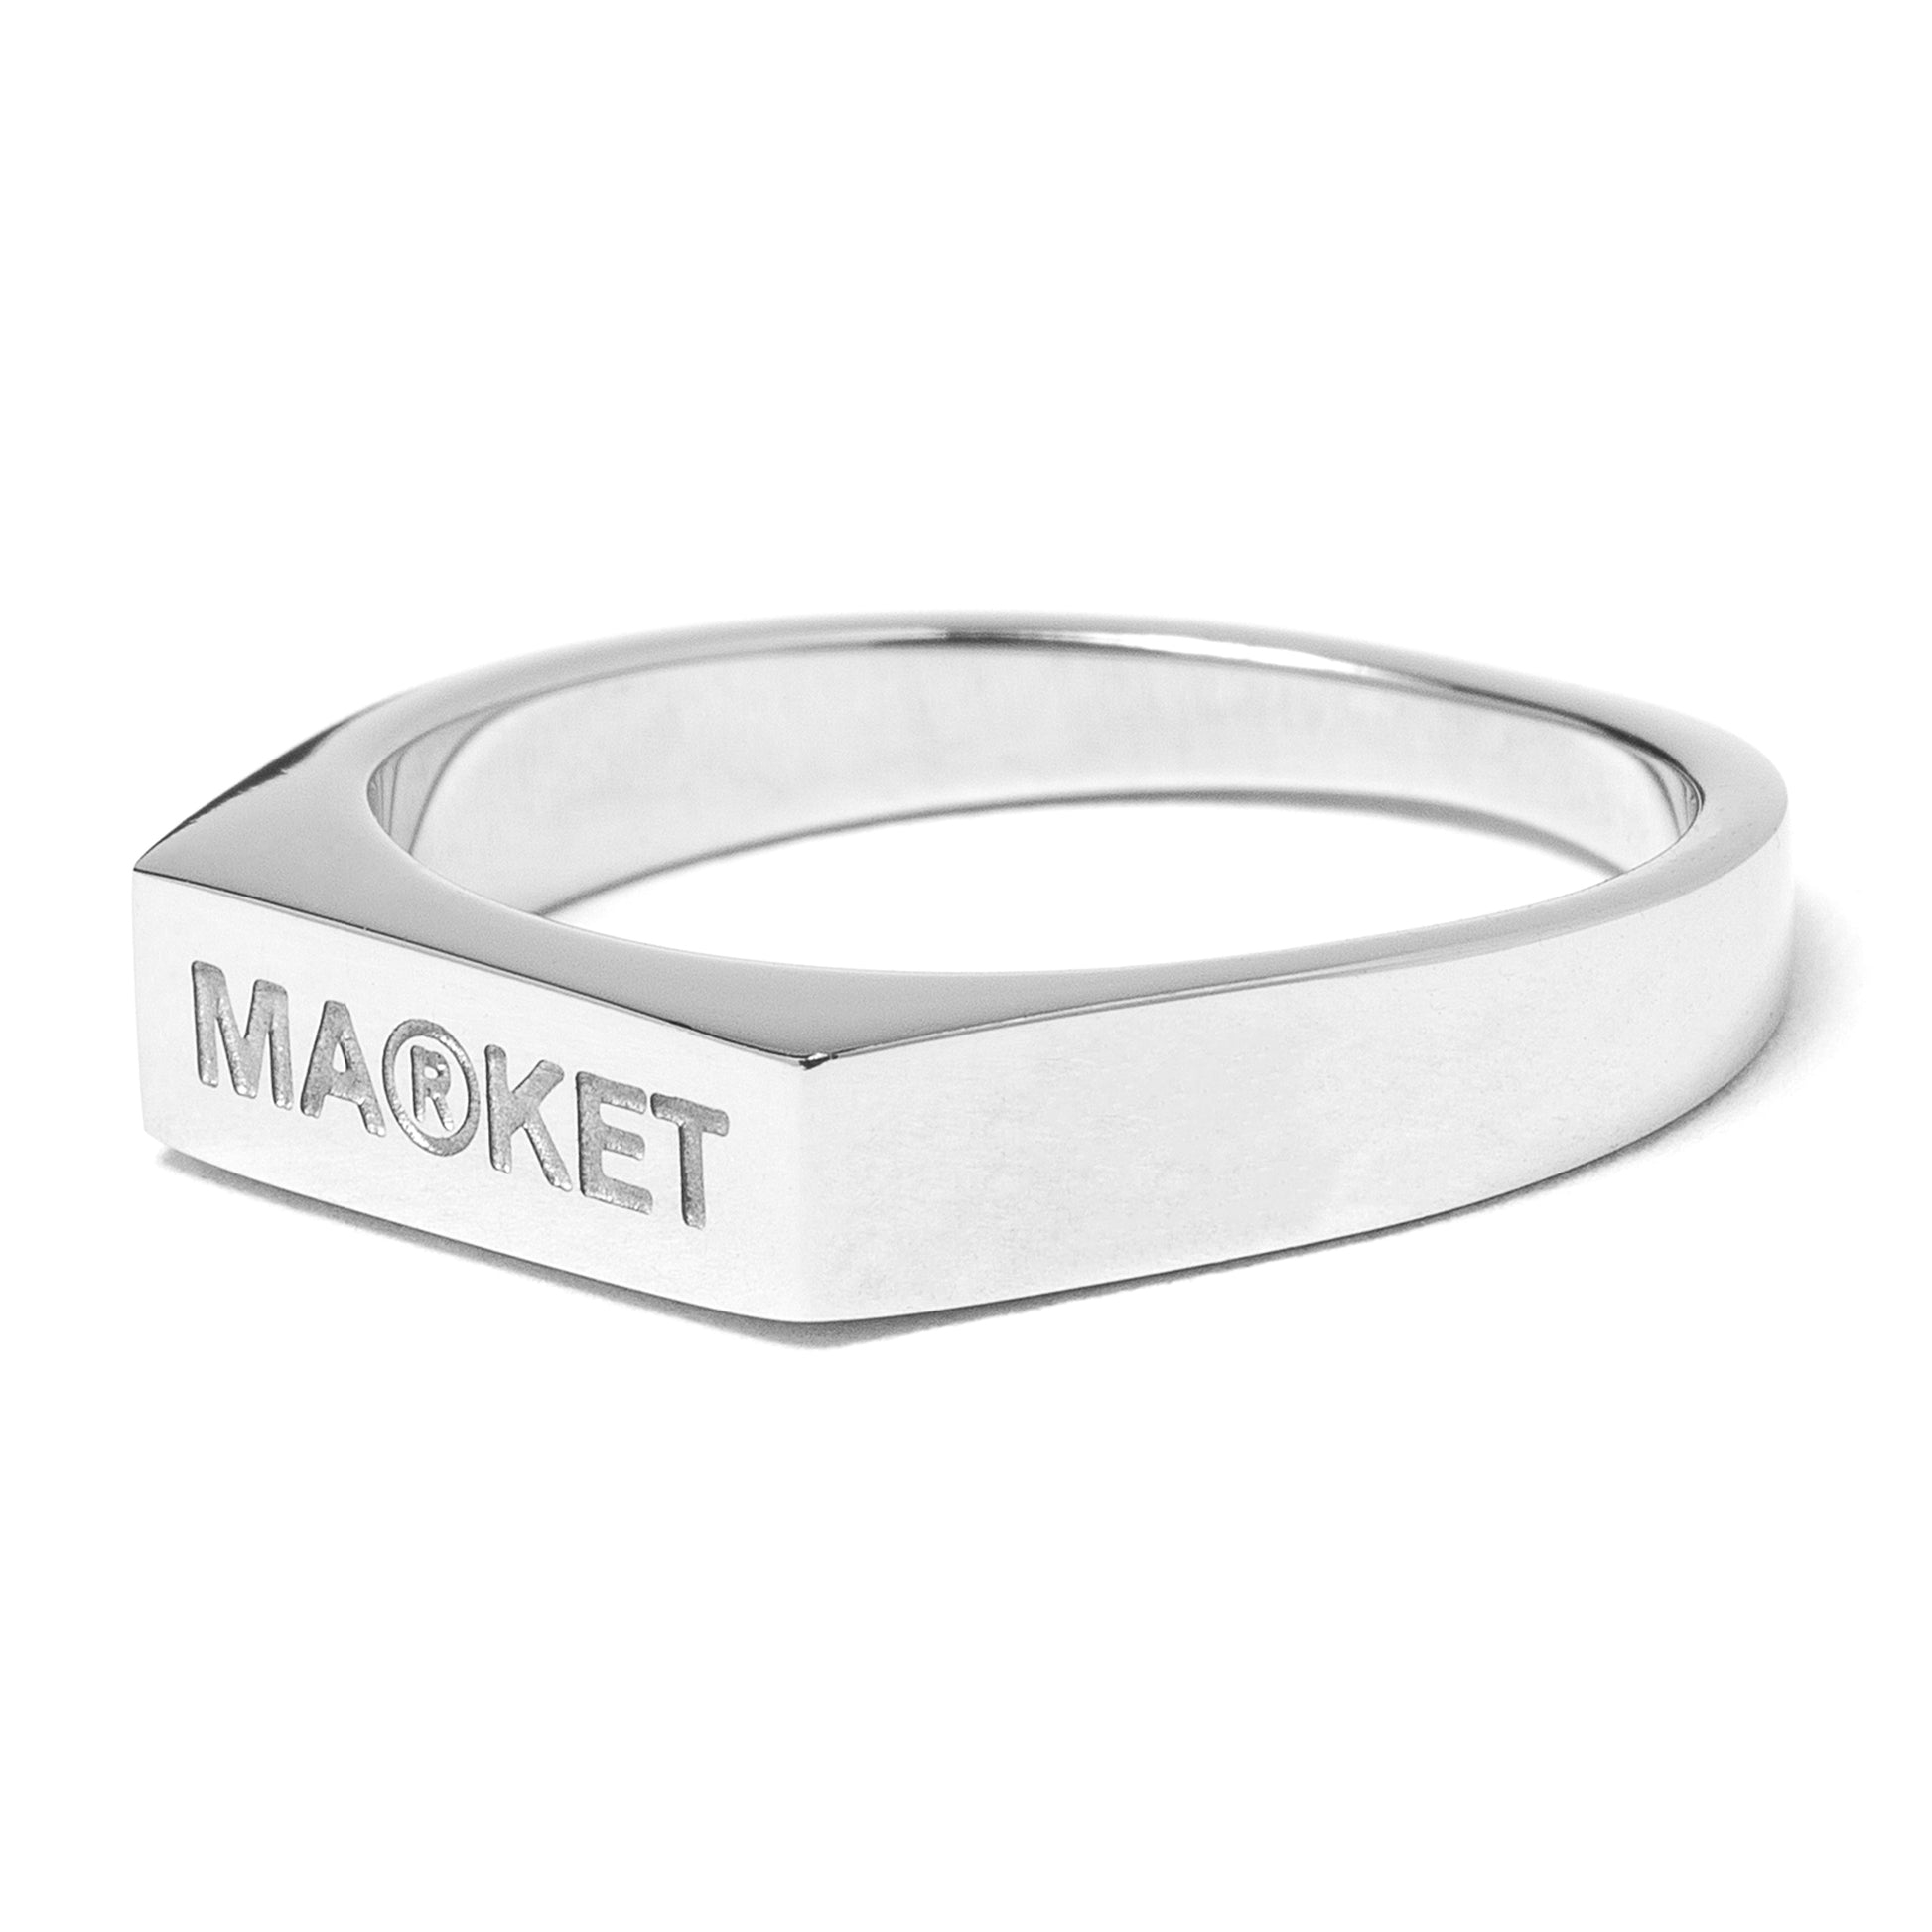 MARKET clothing brand MARKET BAR RING. Find more graphic tees, socks, hats and small goods at MarketStudios.com. Formally Chinatown Market. 